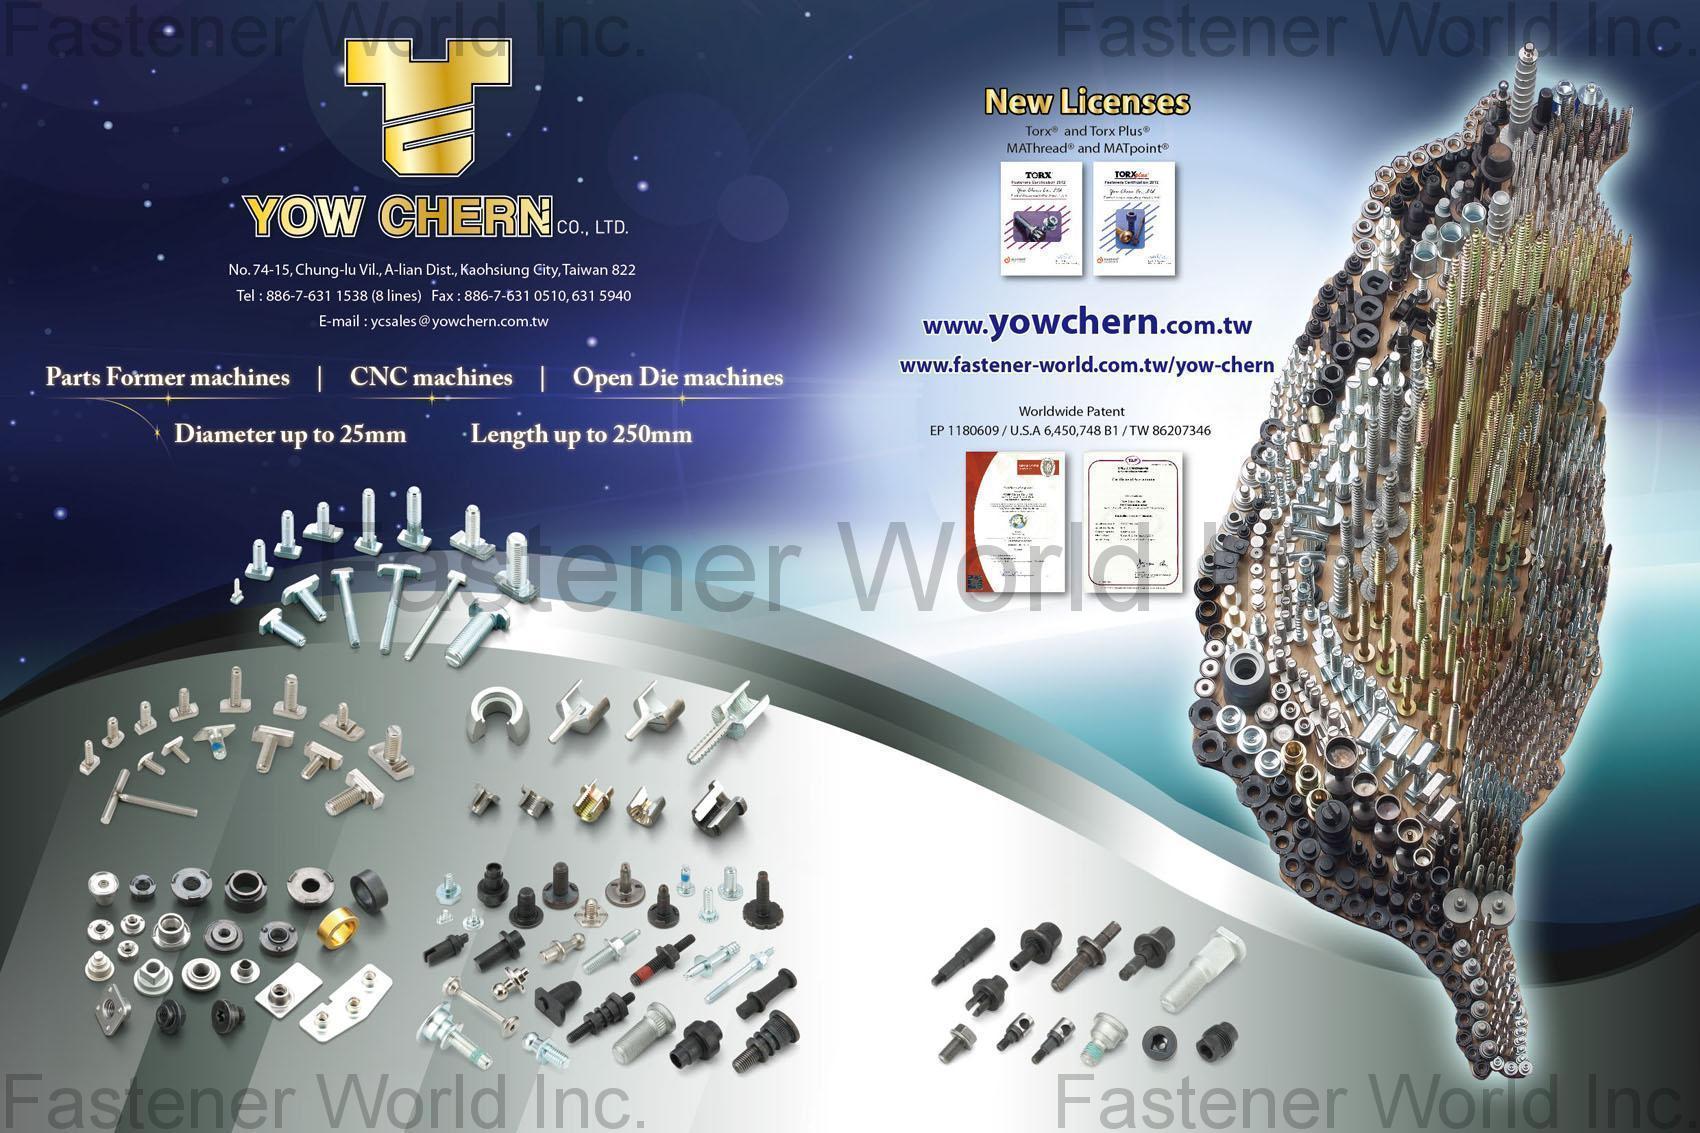 YOW CHERN CO., LTD.  , Aster Screw, Auto Parts, Concrete Screw, Furniture & Construction Screw, Pin & Rivet, Screw Anchor, Sems & Stud Bolt, Special Parts & Bolts, Stainless Steel Screw, T Bolt, Thread Forming Screw, Wedge Anchor, Welding Bolt & Nuts, Wheel Bolts & Nuts, Window Screw, Woodworking Screw , Furniture Screws